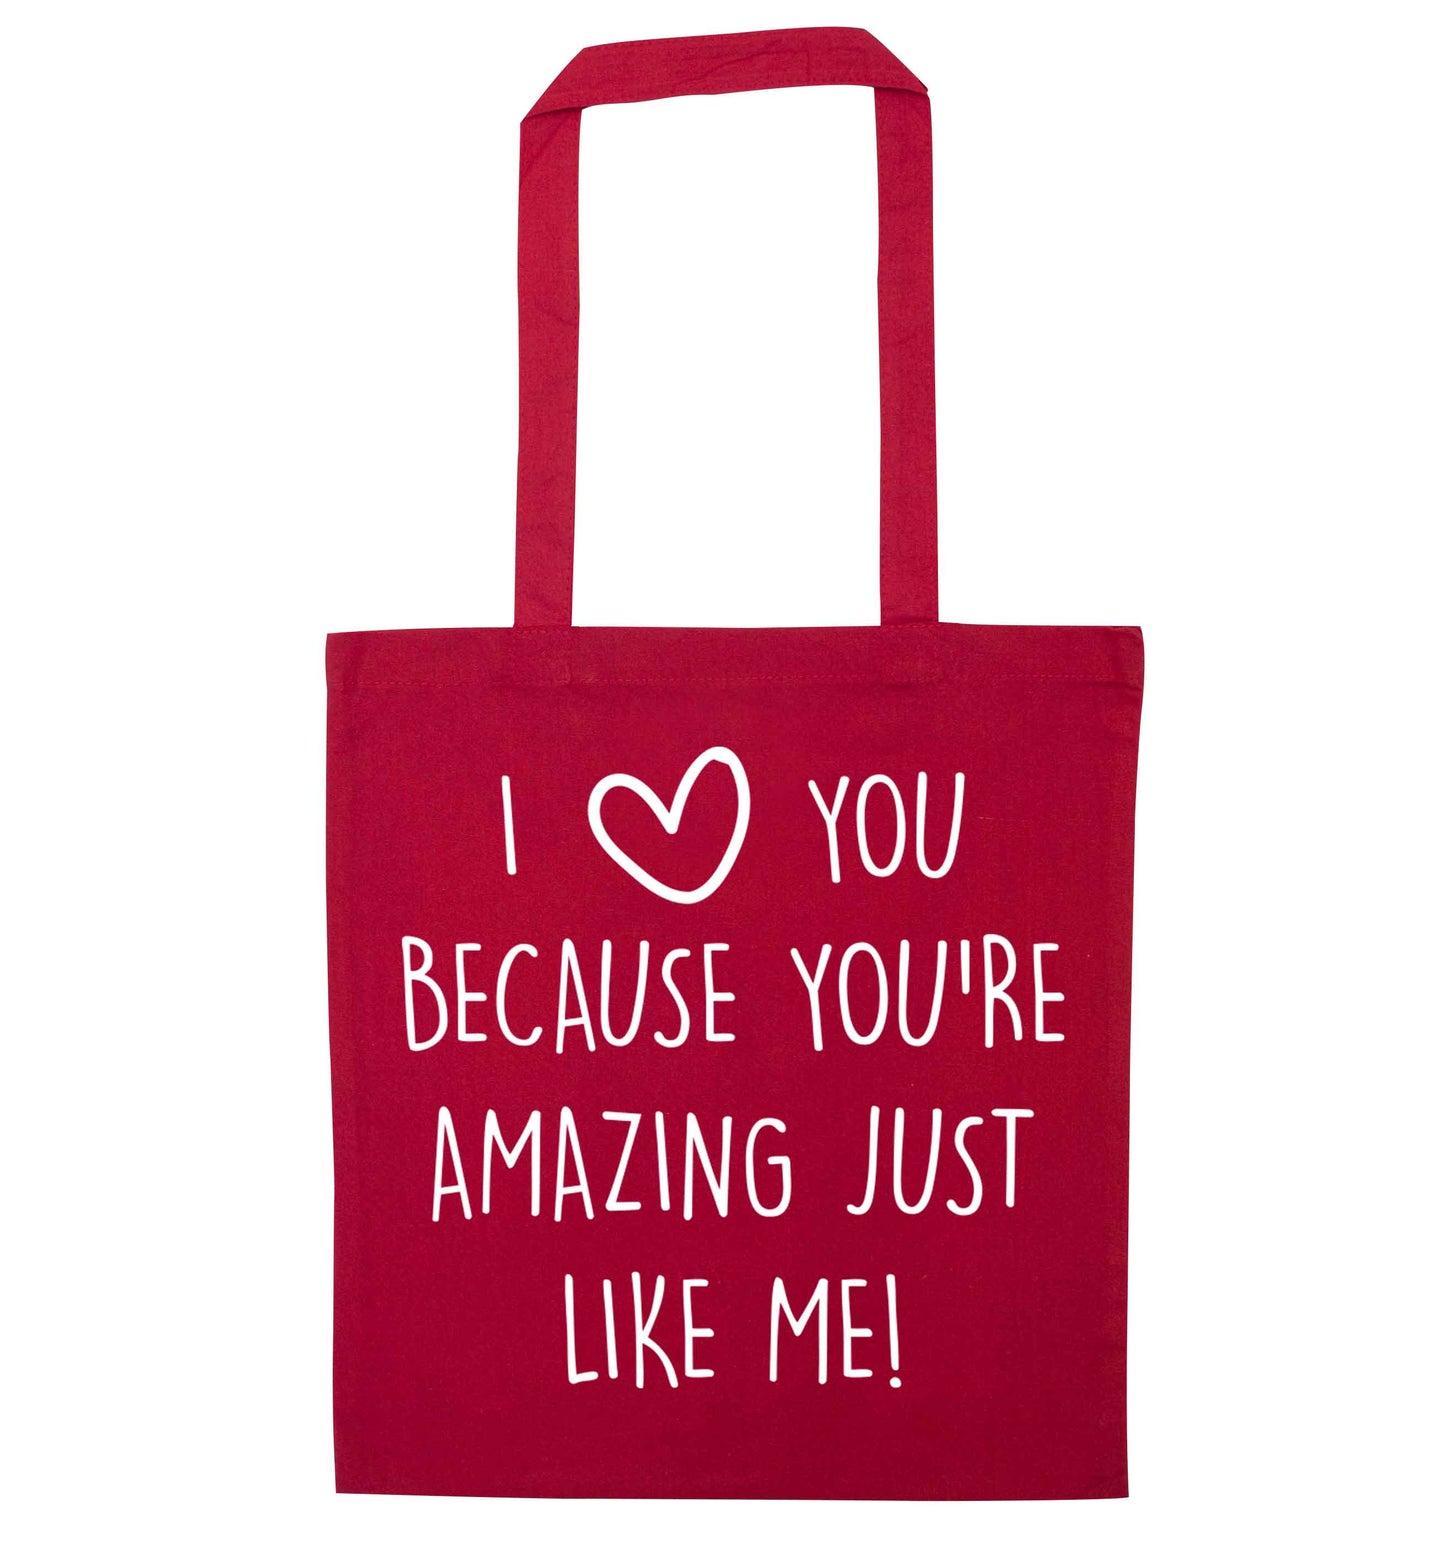 I love you because you're amazing just like me red tote bag